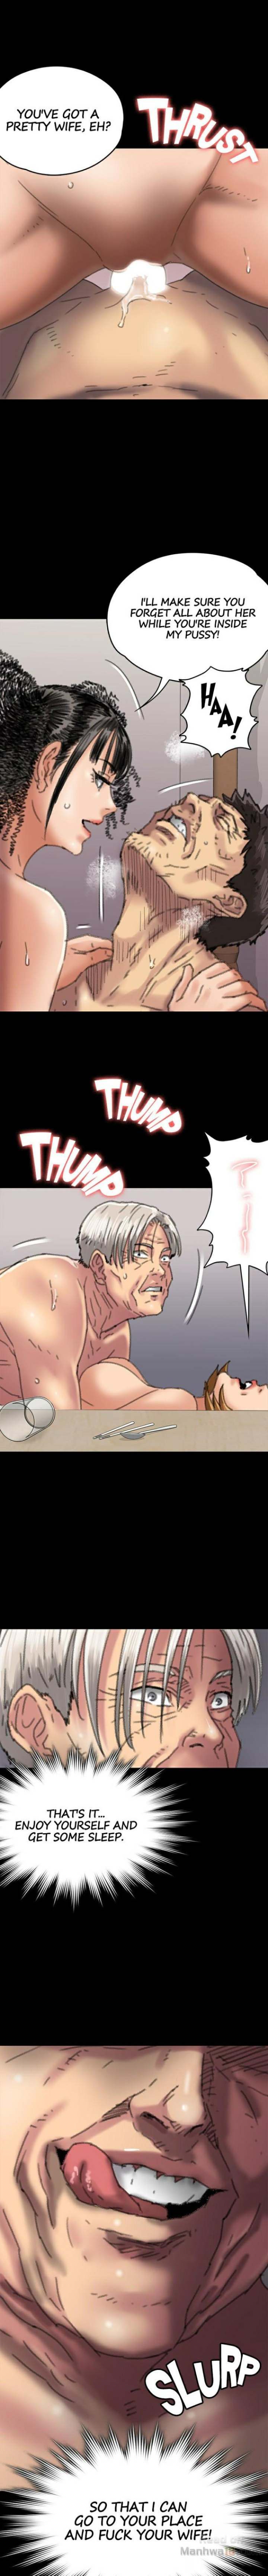 Panel Image 1 for chapter 57 of manhwa Queen Bee on read.oppai.stream